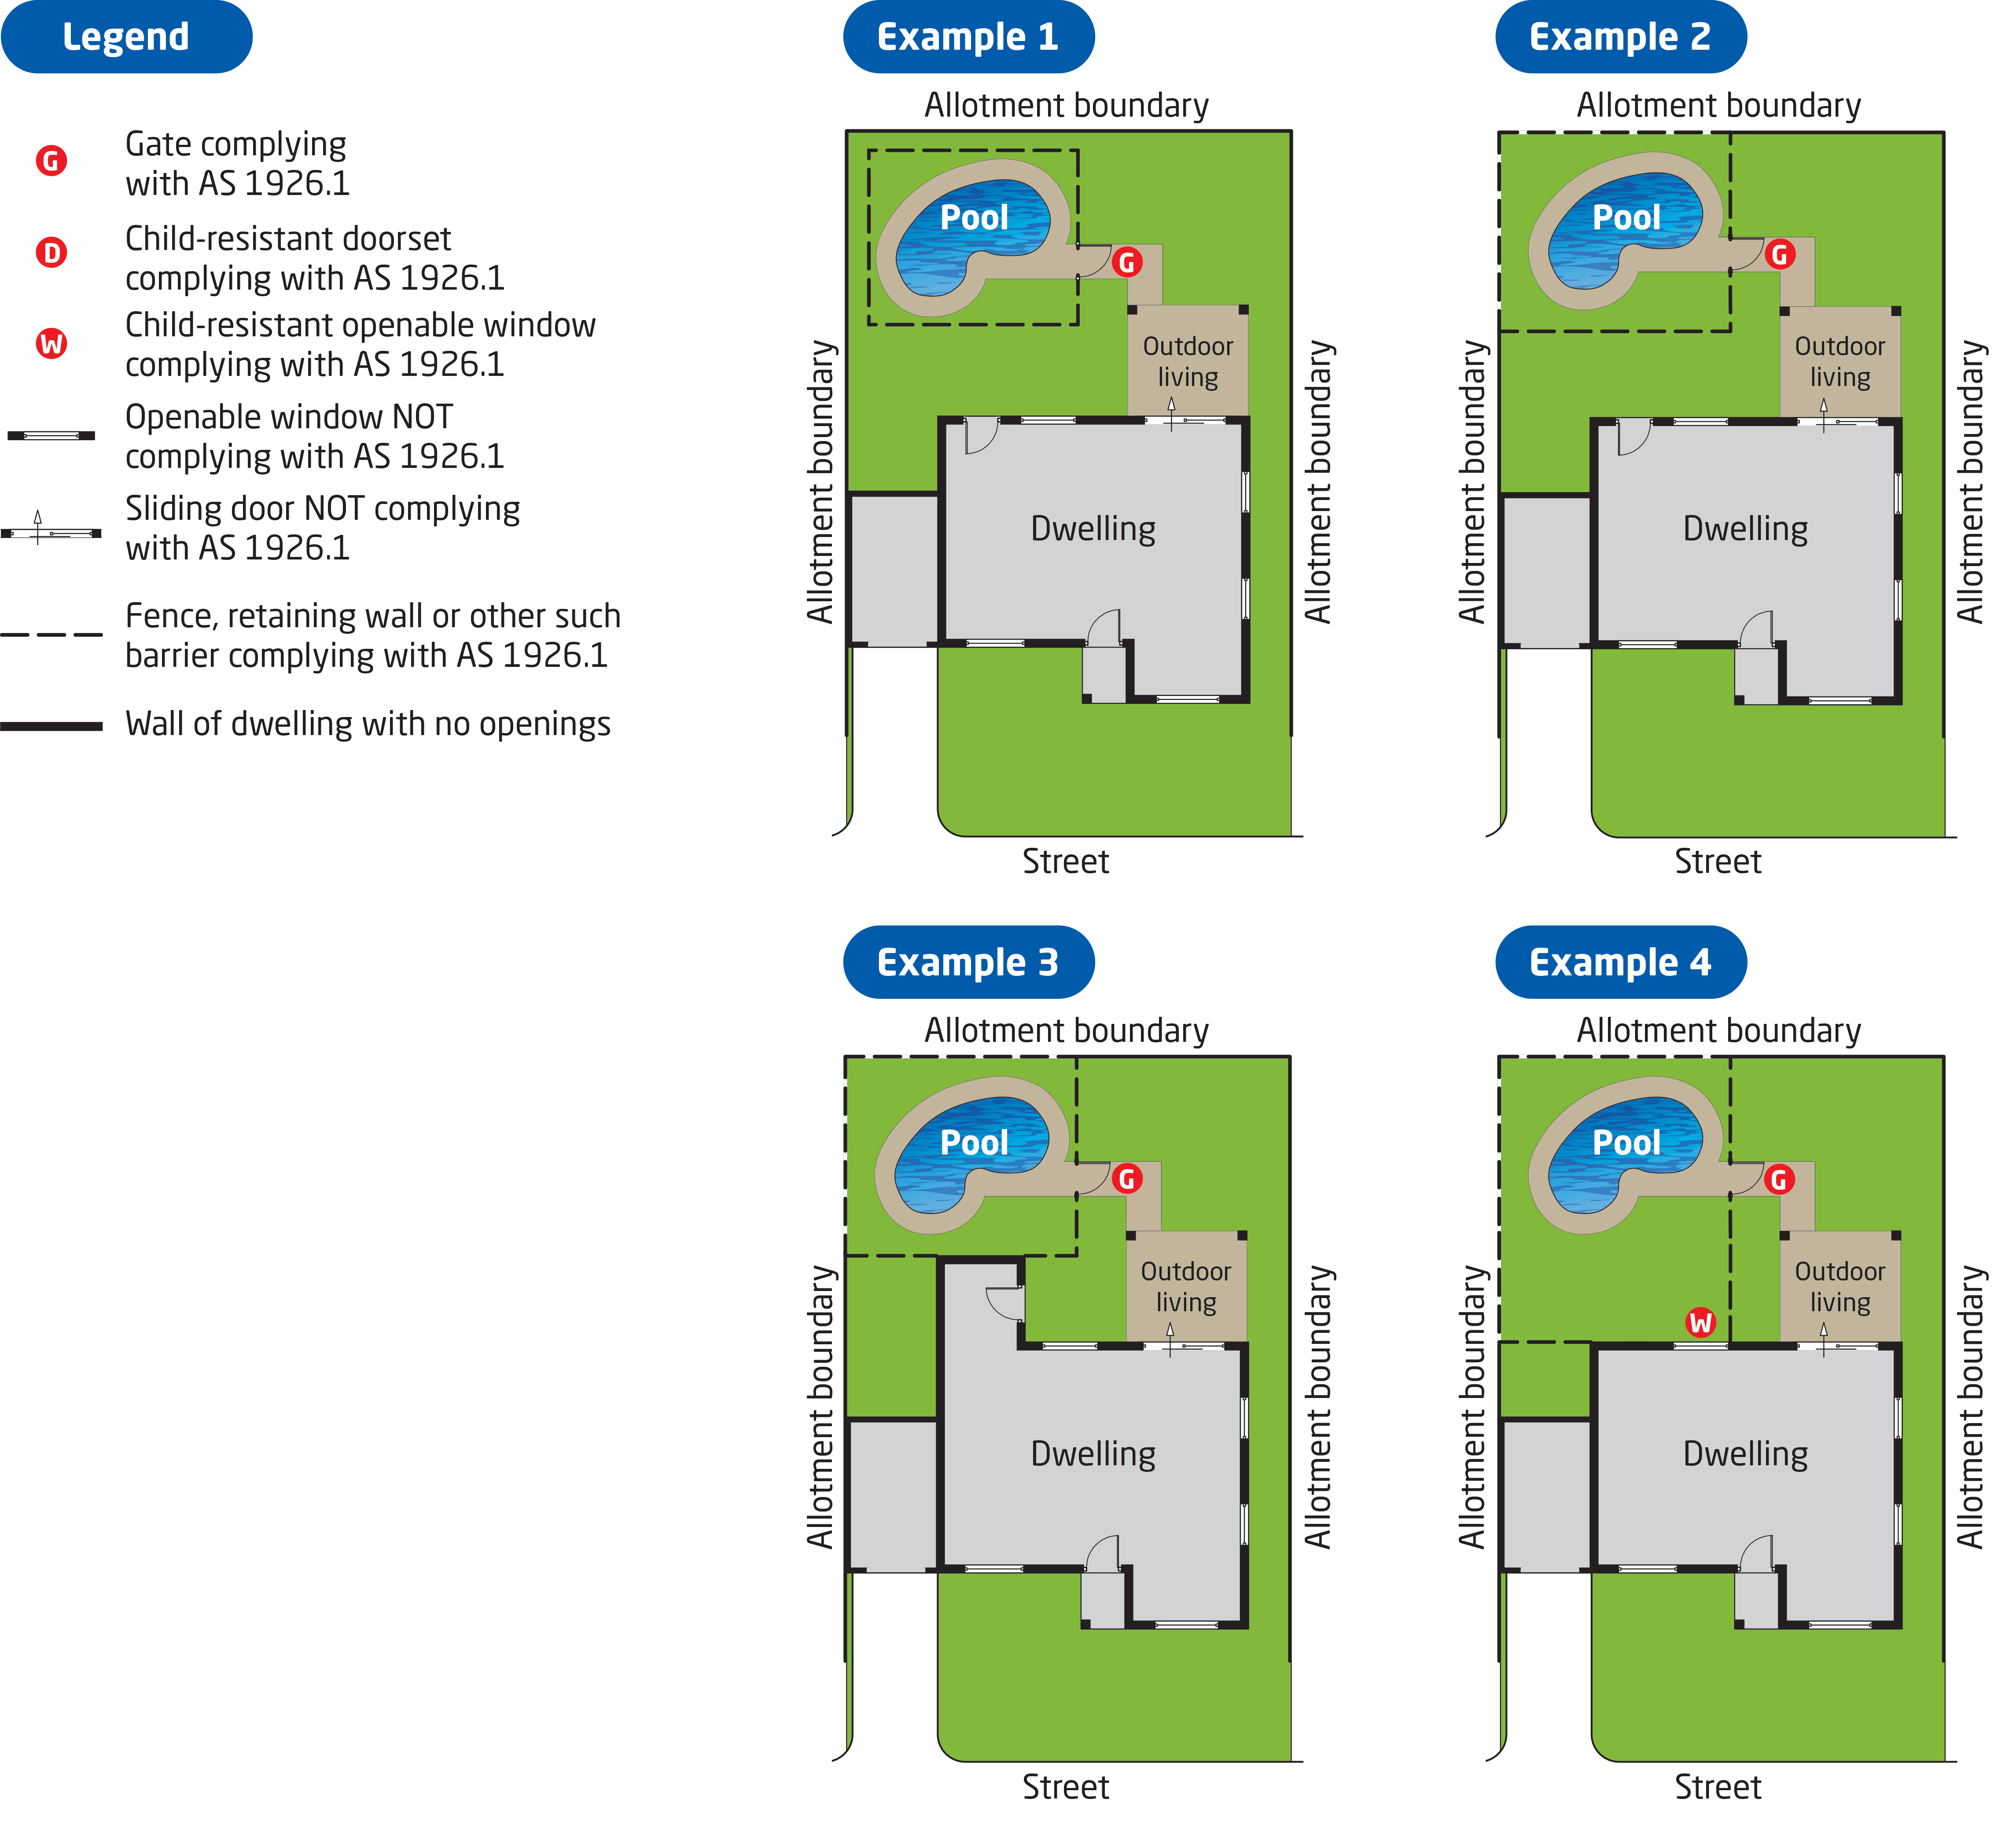 Rules for pools examples 1-4